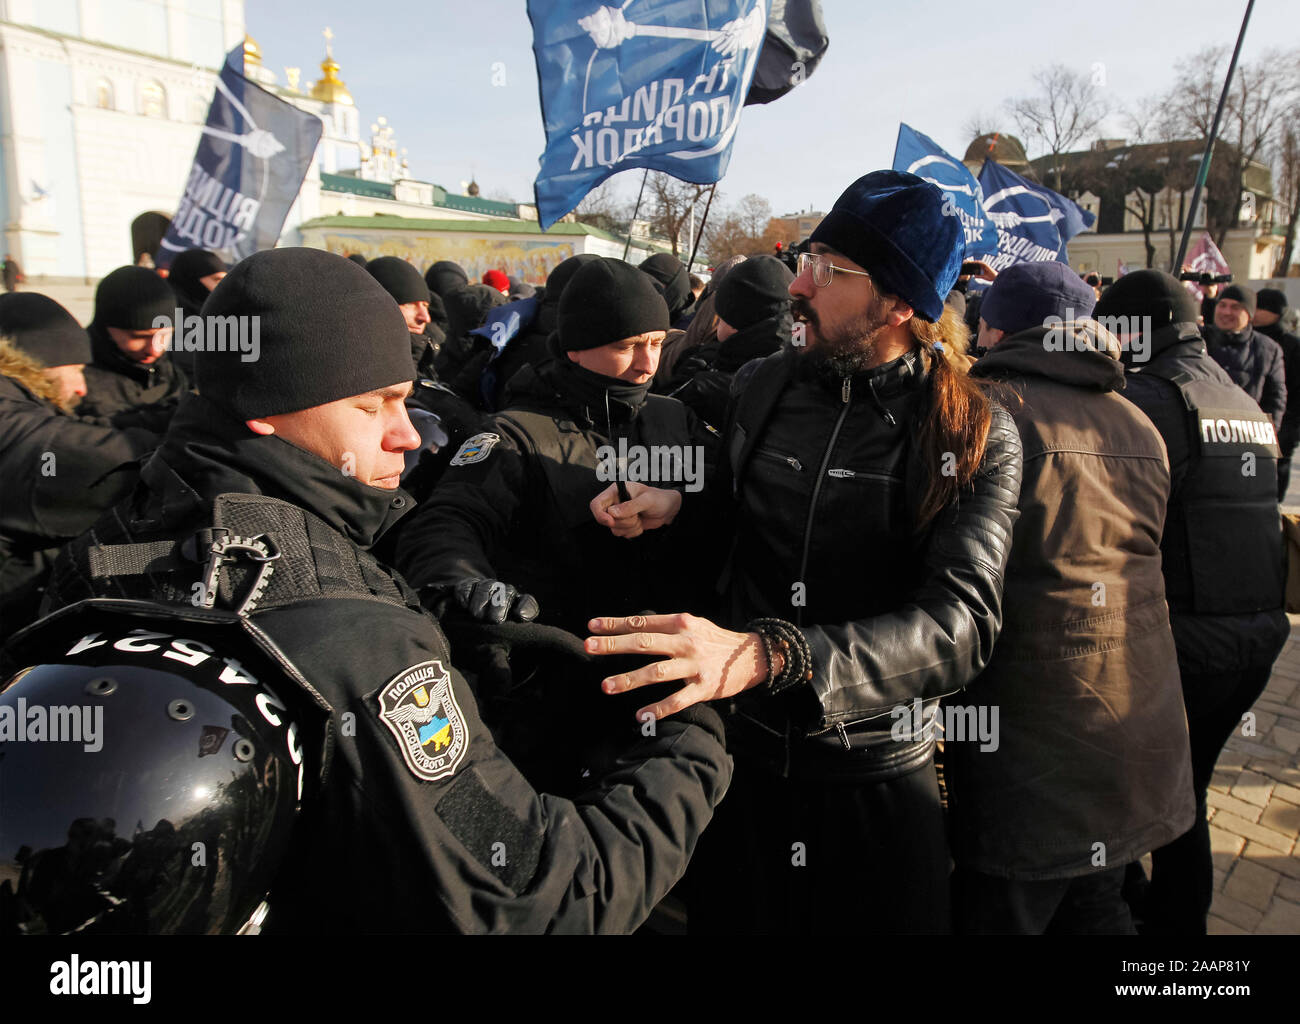 Policemen clash with far-right activists during the march.Transgender rights activists in Ukraine’s capital Kyiv held a march to mark Transgender Day of Remembrance. In 2018, the police failed to protect those participating in a similar march from attacks by violent groups advocating hatred and discrimination. This year, there is a serious risk of new attacks and the police must ensure people can safely exercise their rights to freedom of peaceful assembly and expression without discrimination. Stock Photo